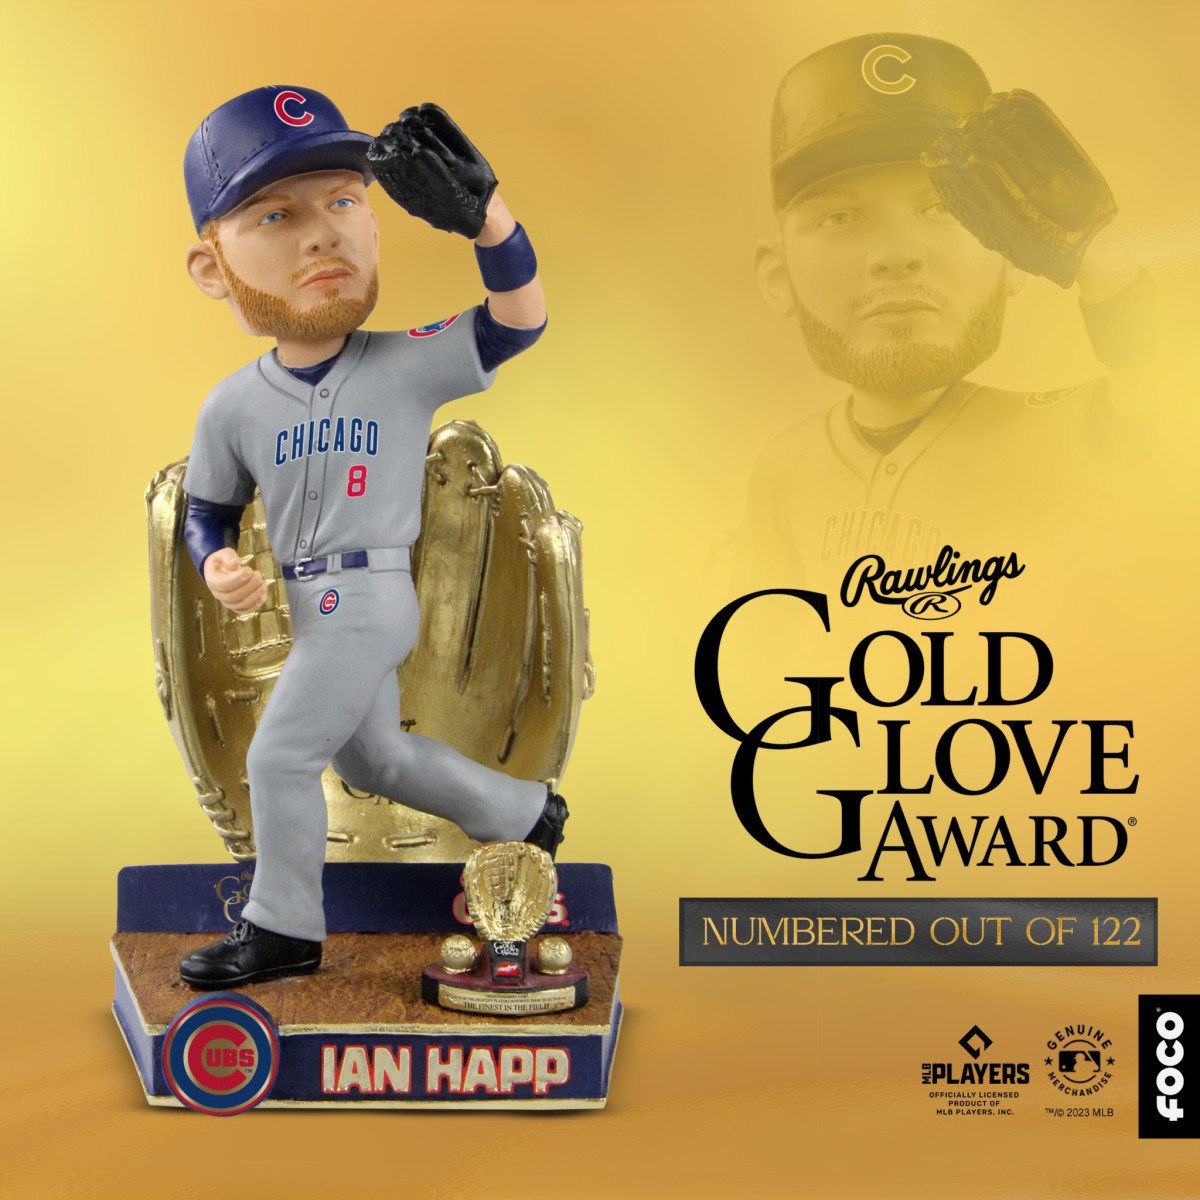 FOCO USA Launches Chicago Cubs Gold Glove Bobbleheads Collection